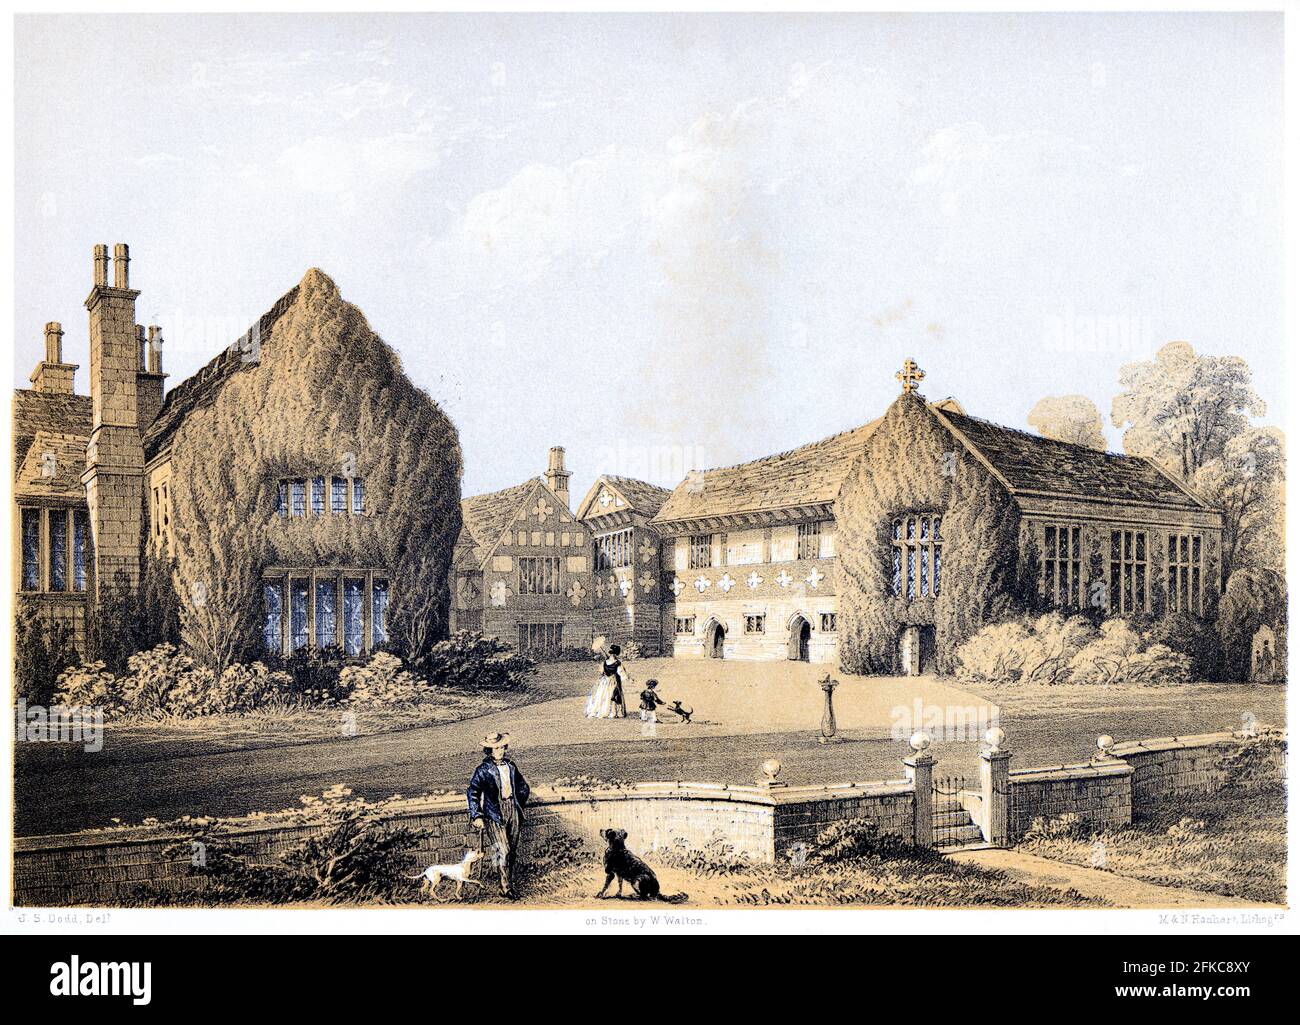 A lithotint of Smithells Hall (Smithills Hall), Lancashire UK scanned at high resolution from a book printed in 1858. Believed copyright free. Stock Photo